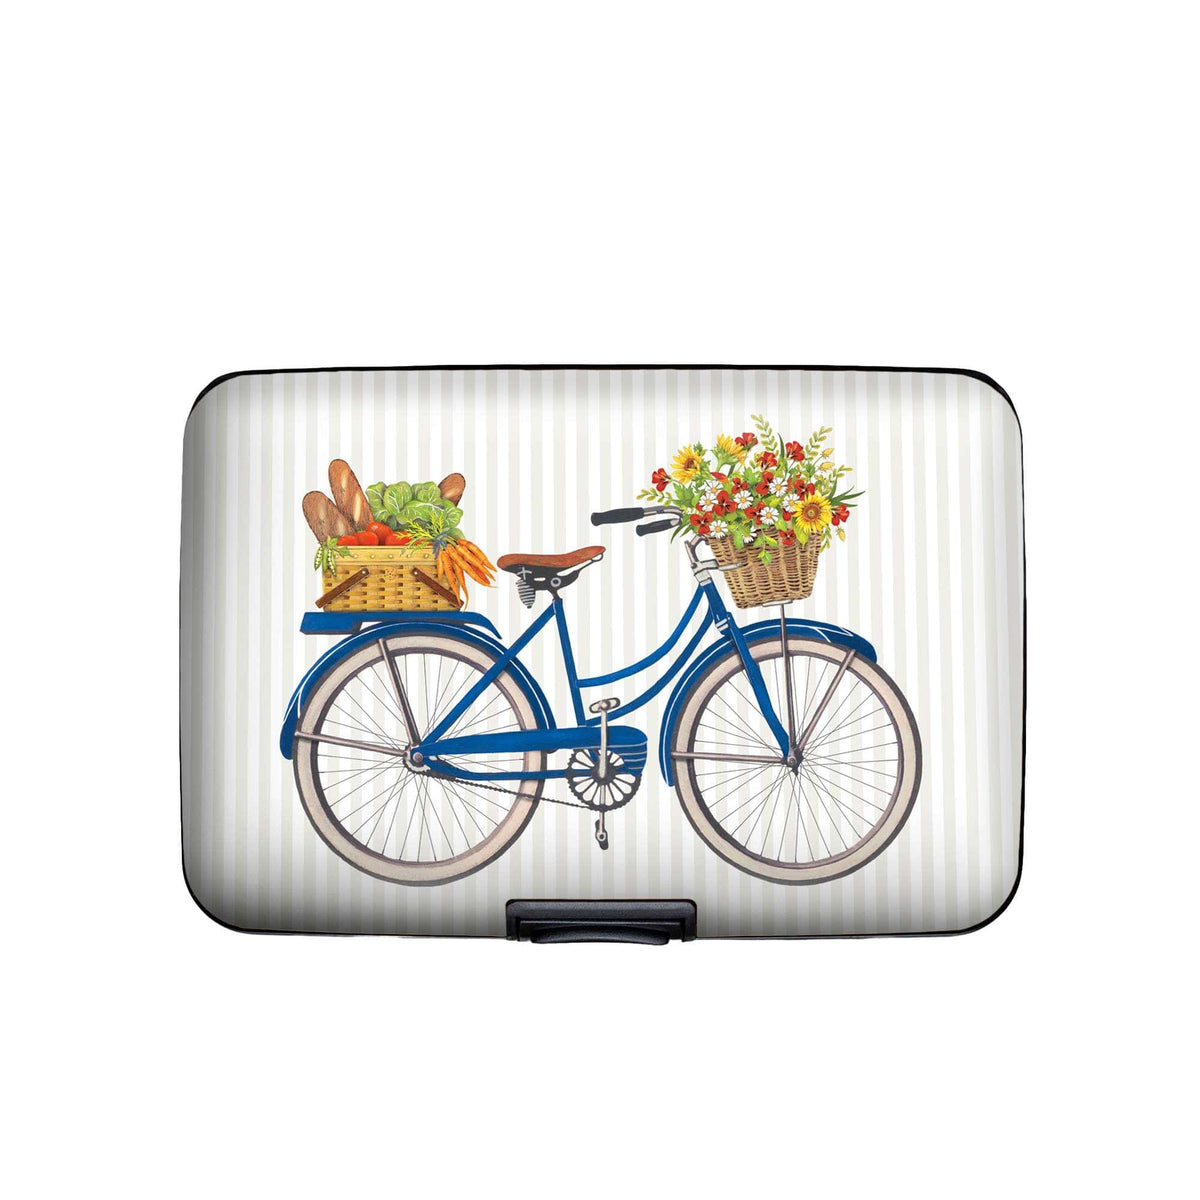 Monarque Mary Lake Bicycle Armored Wallet RFID protection hard shell